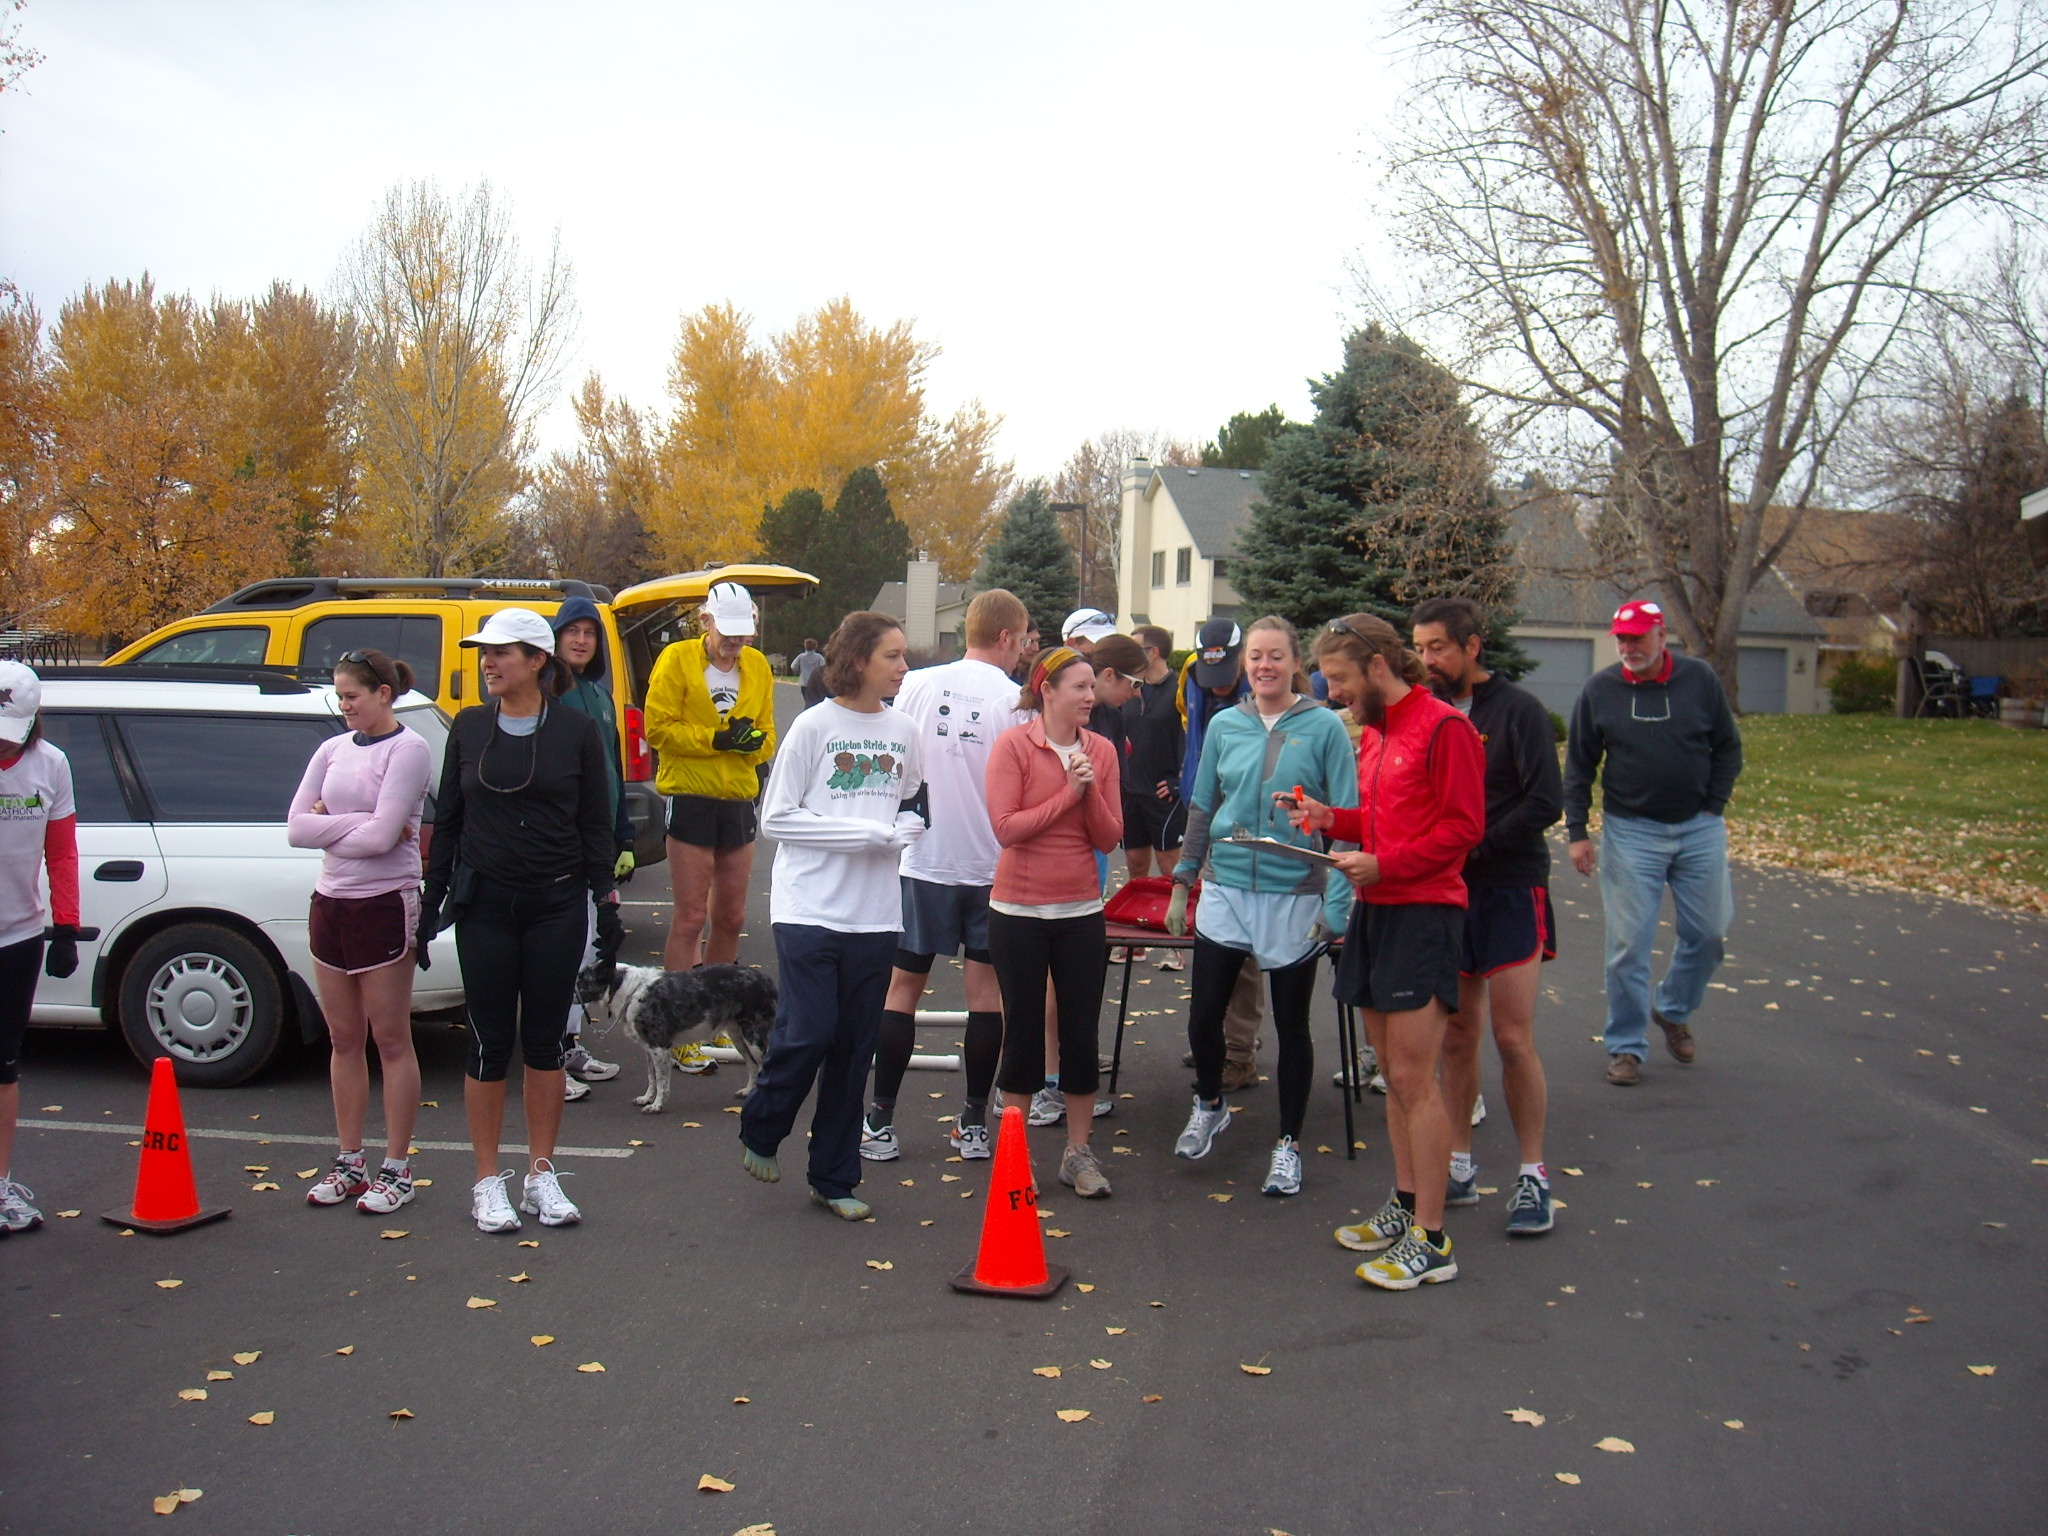 Forty-four runners attended -- a new record for the Tortoise & Hare Series.